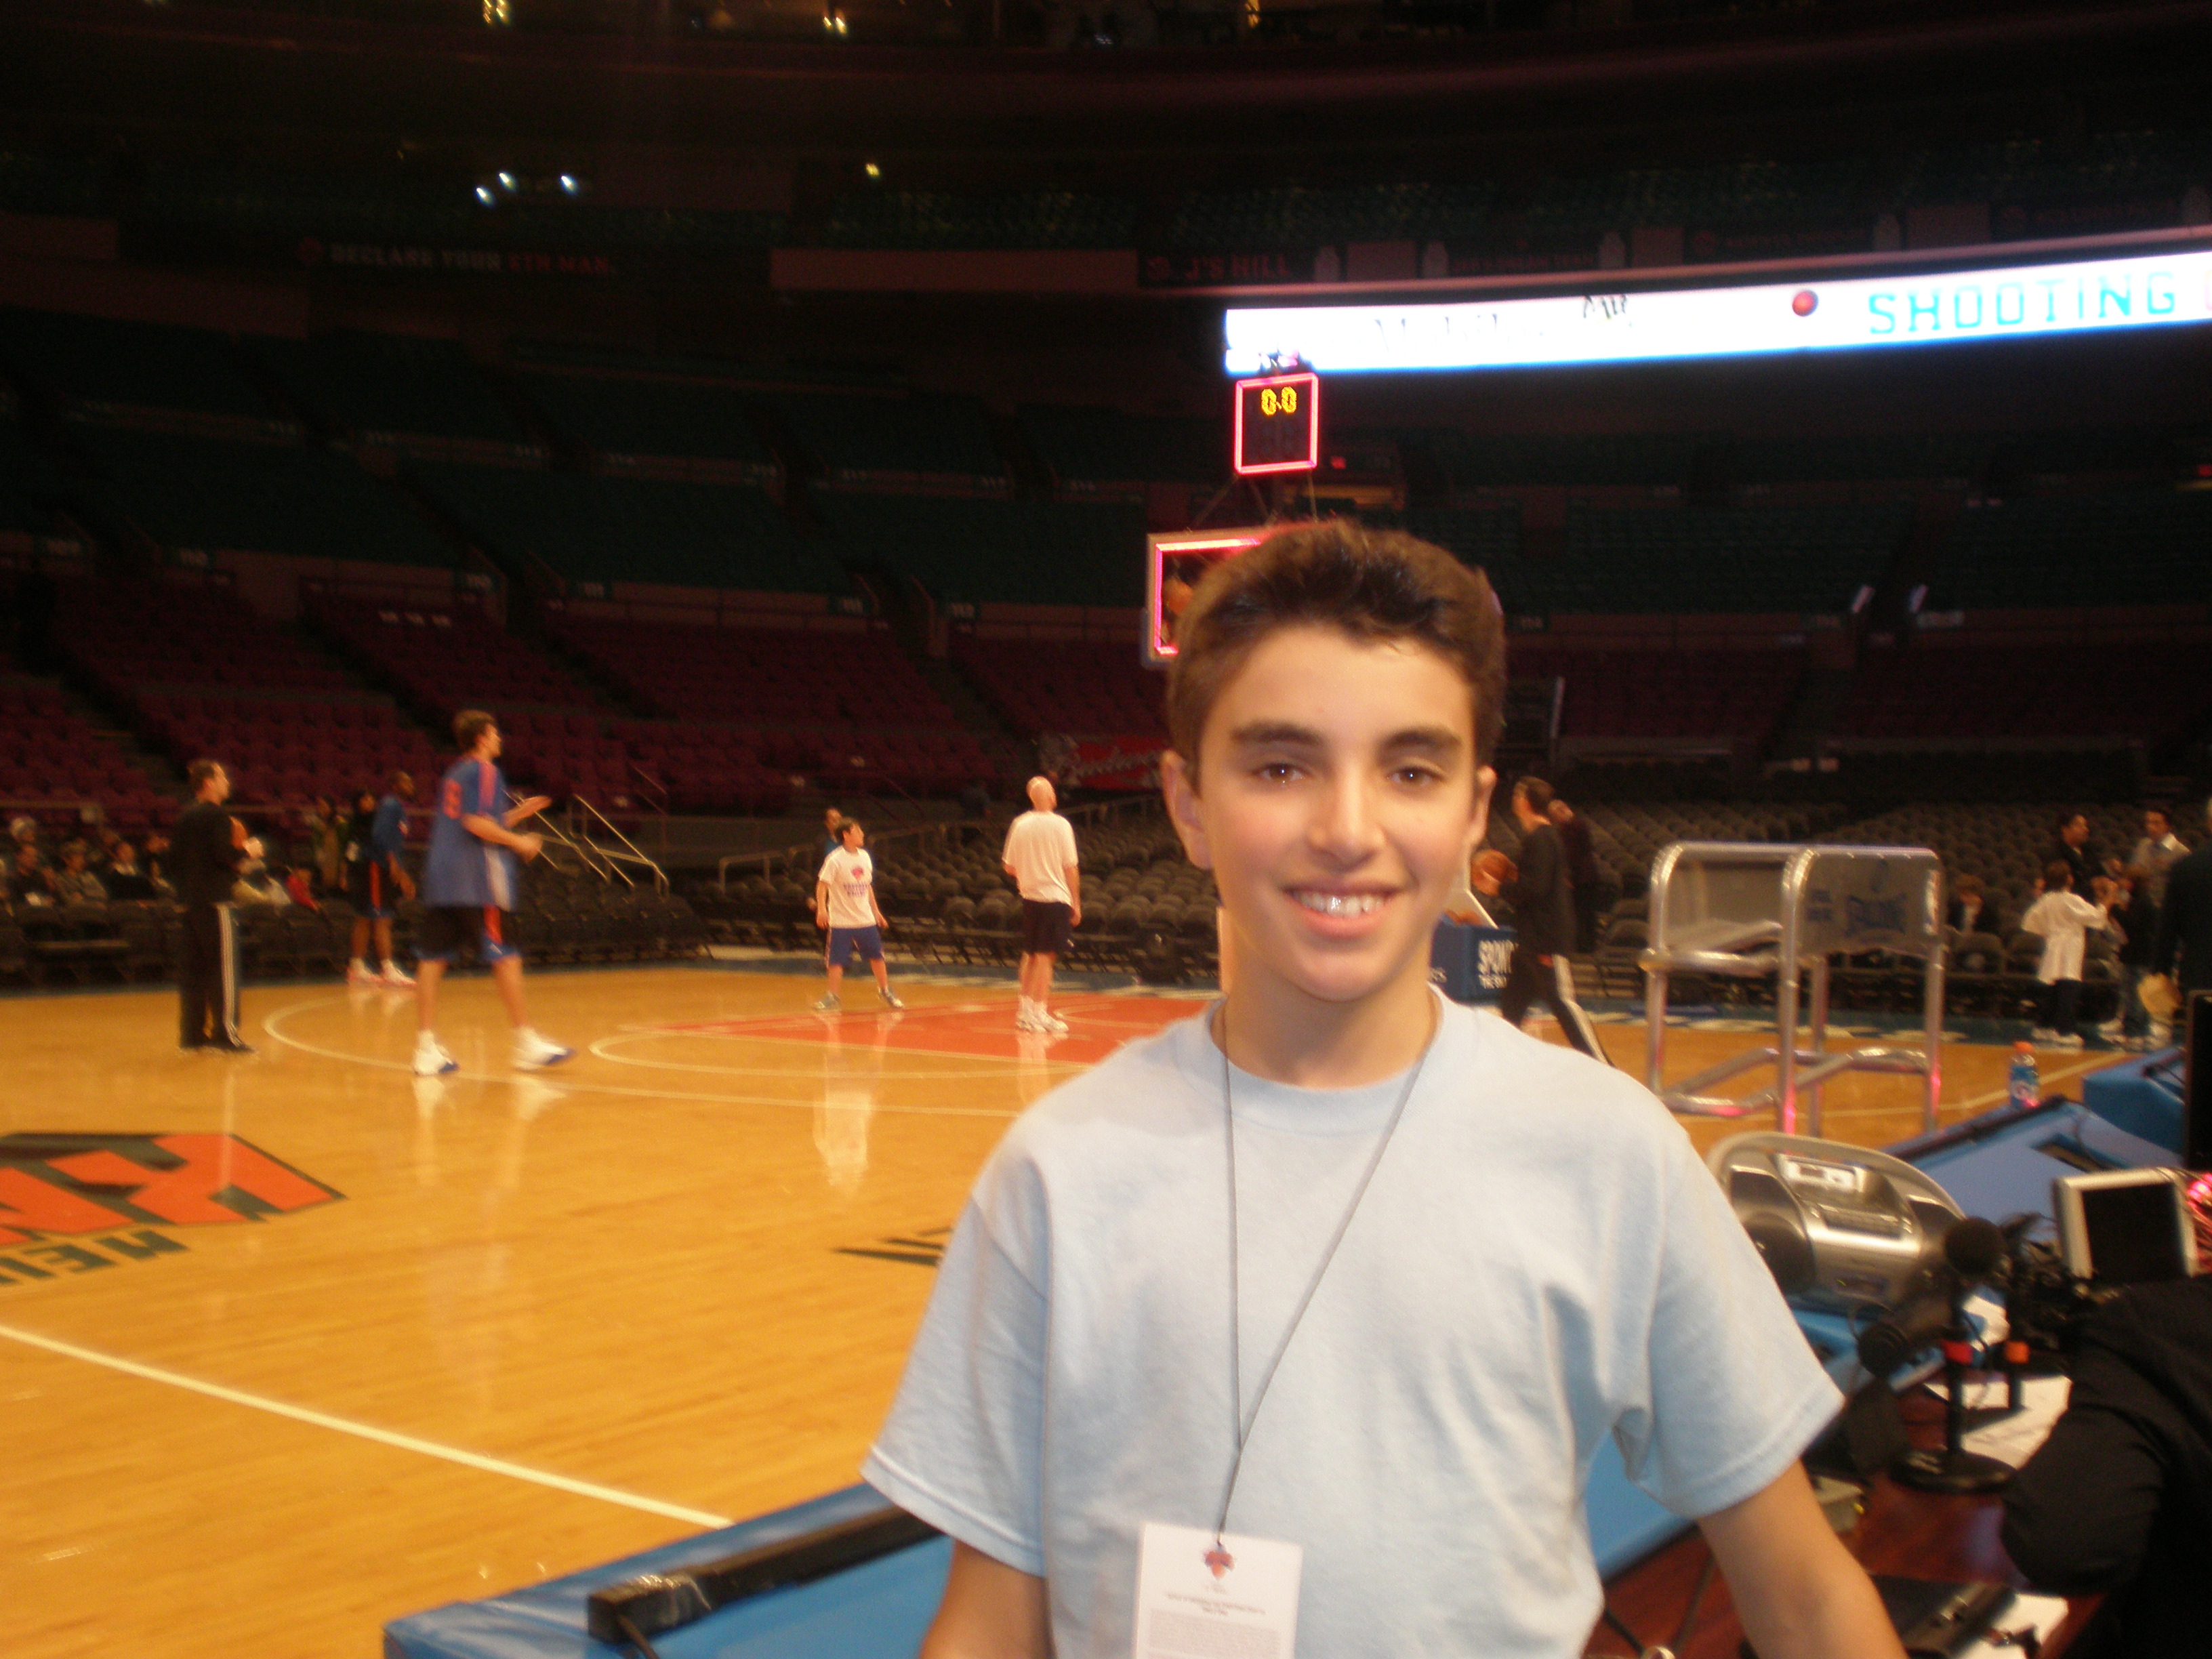 Christopher played piano for the NY Knicks halftime show at Madison Square Garden 2009